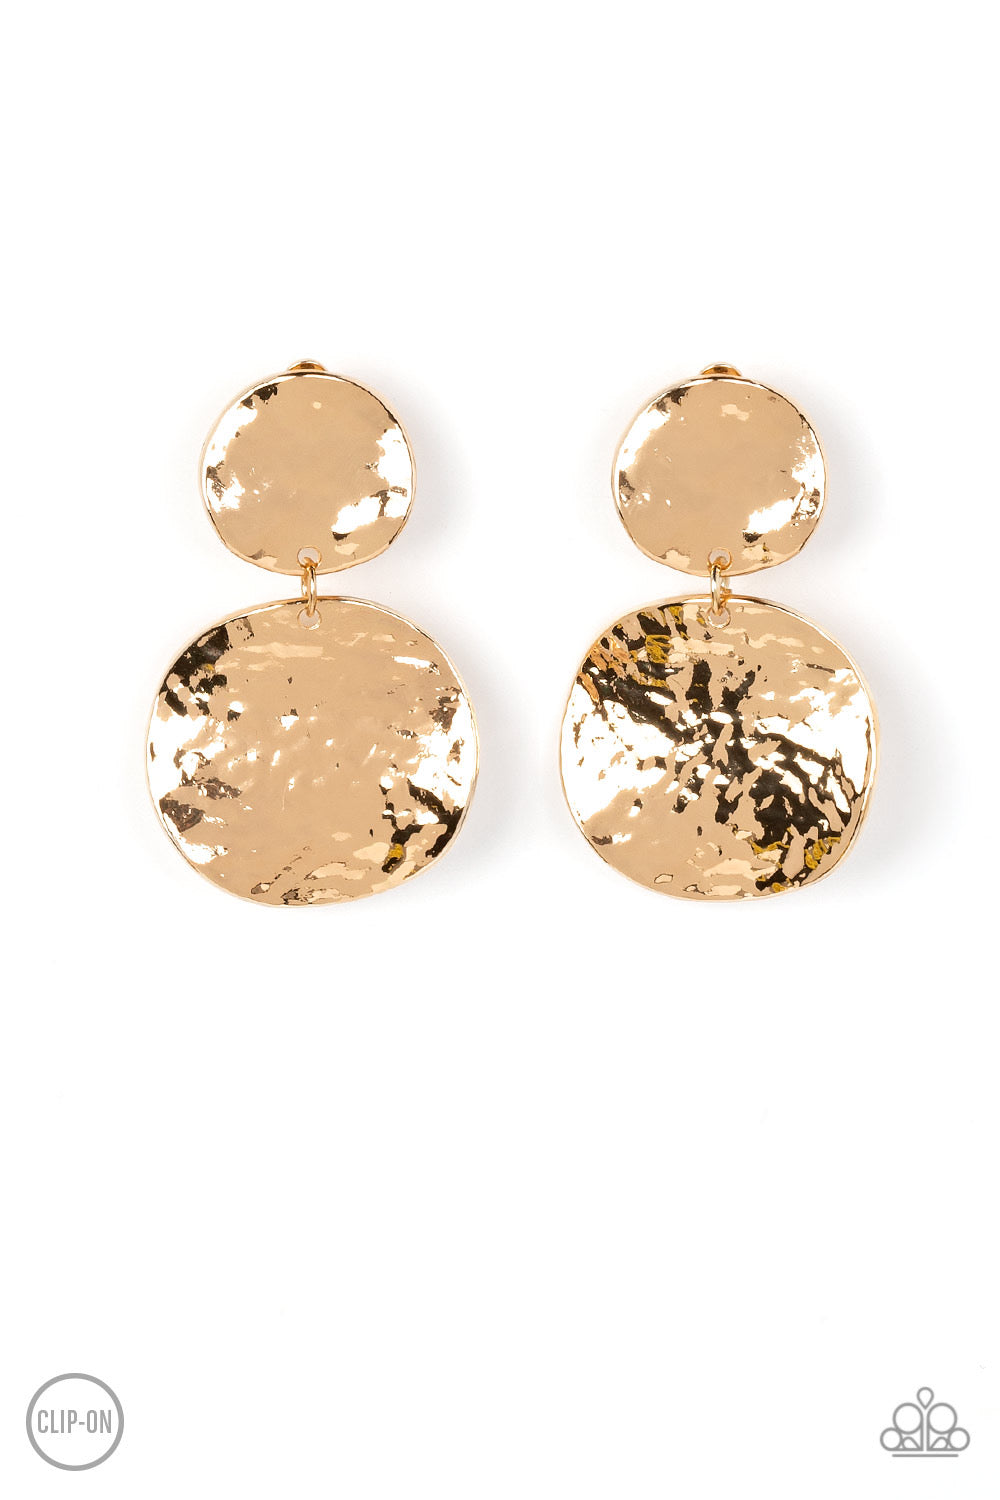 Paparazzi Rush Hour - Gold Clip on Earrings